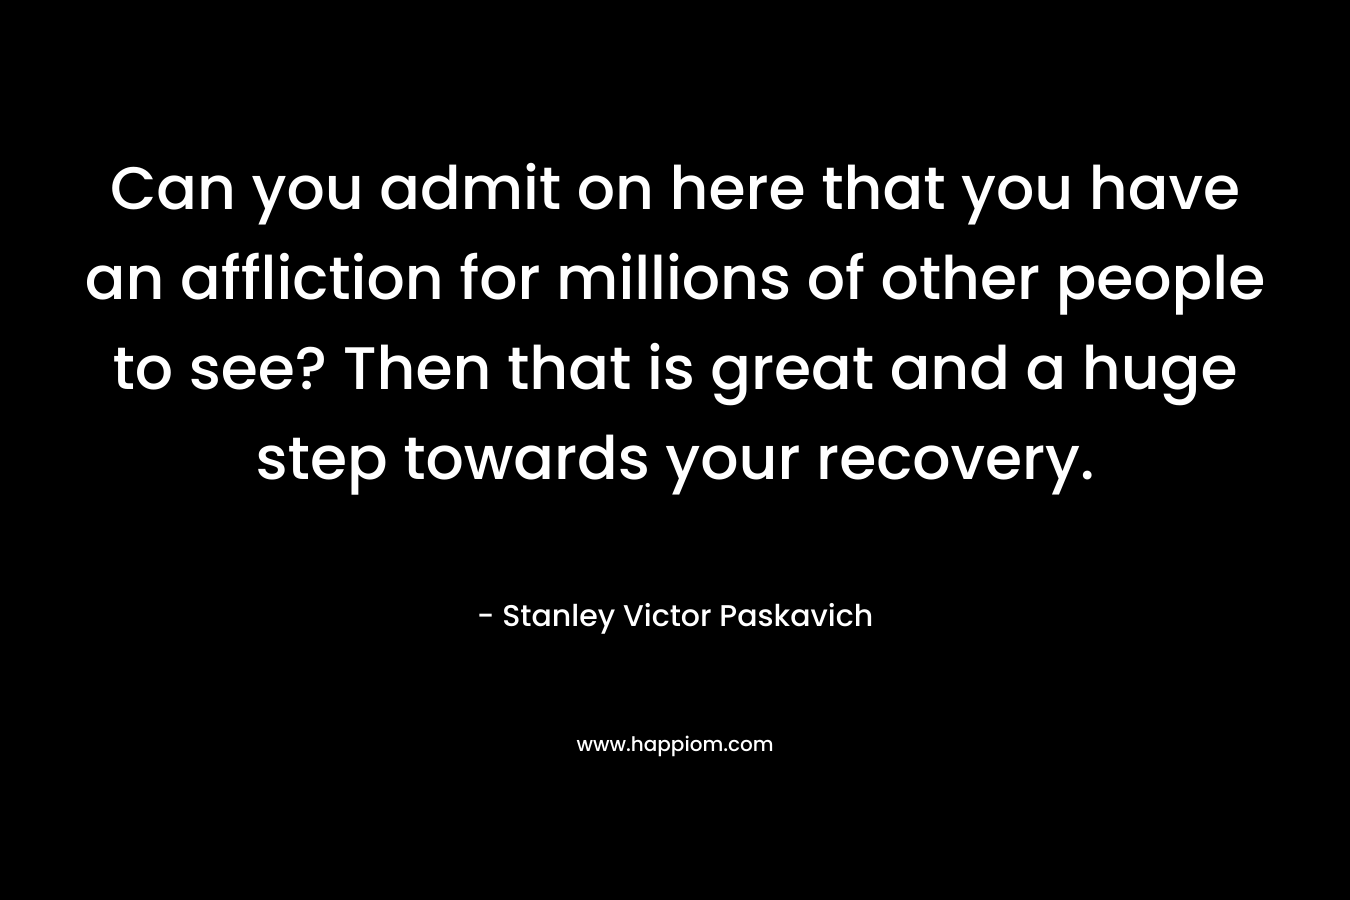 Can you admit on here that you have an affliction for millions of other people to see? Then that is great and a huge step towards your recovery.